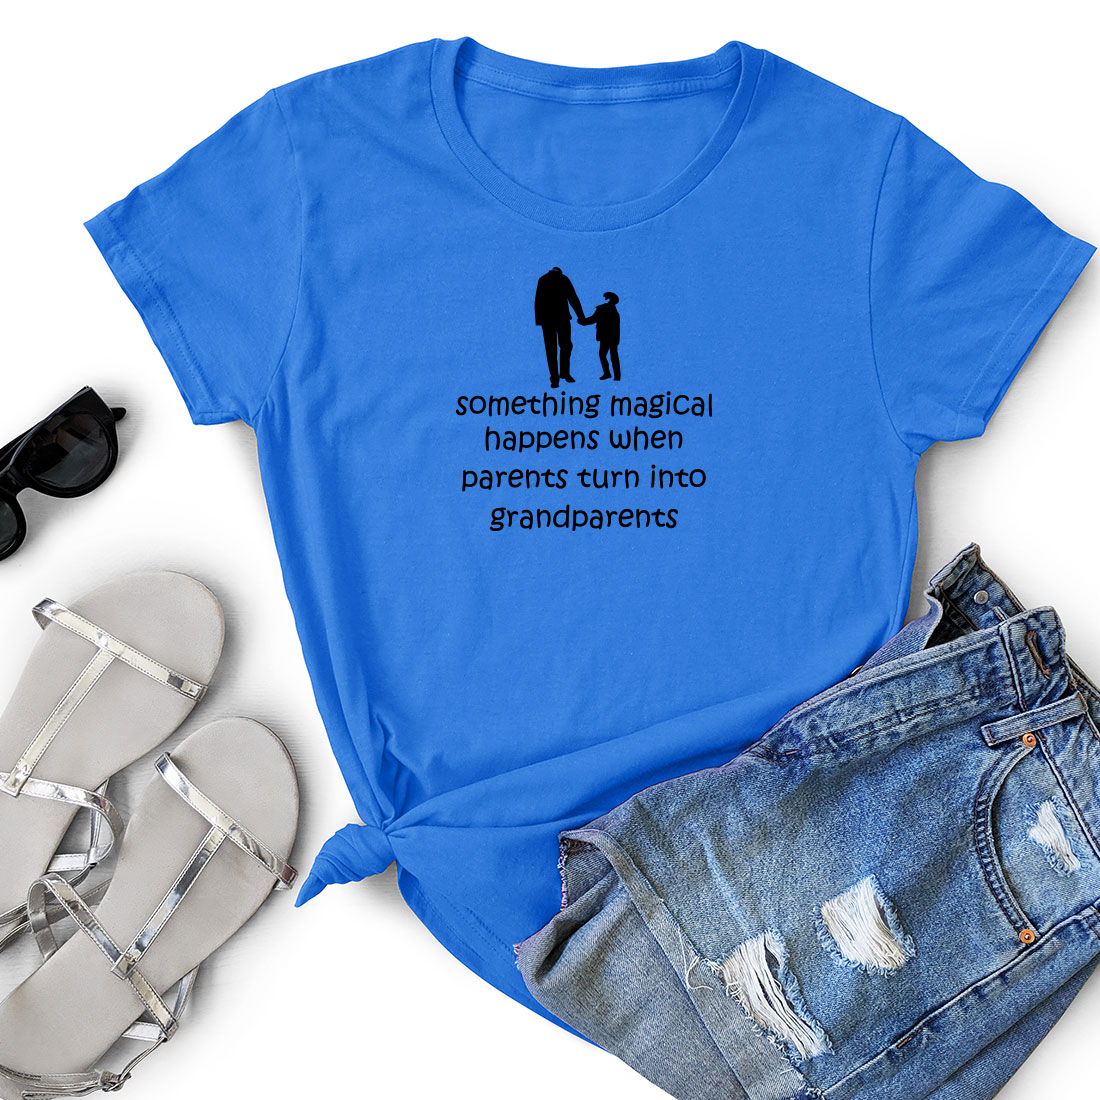 T - shirt that says something medical happens when parents turn into grandparents.